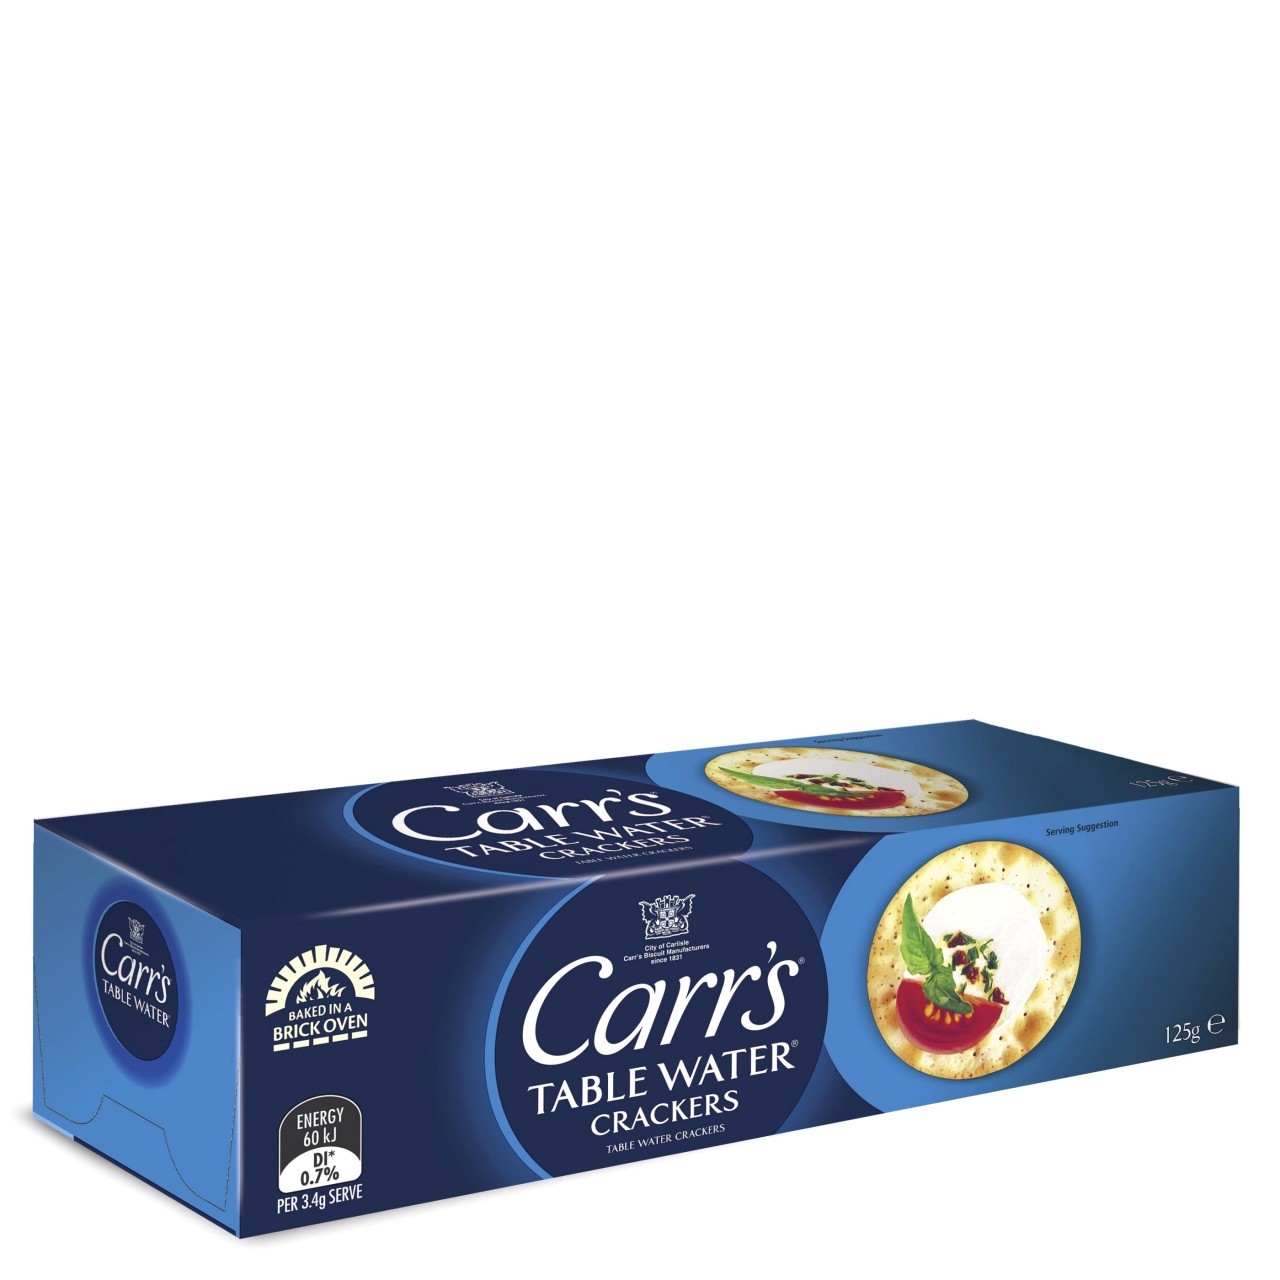 CARRS TBL WATER CRACKERS 120g